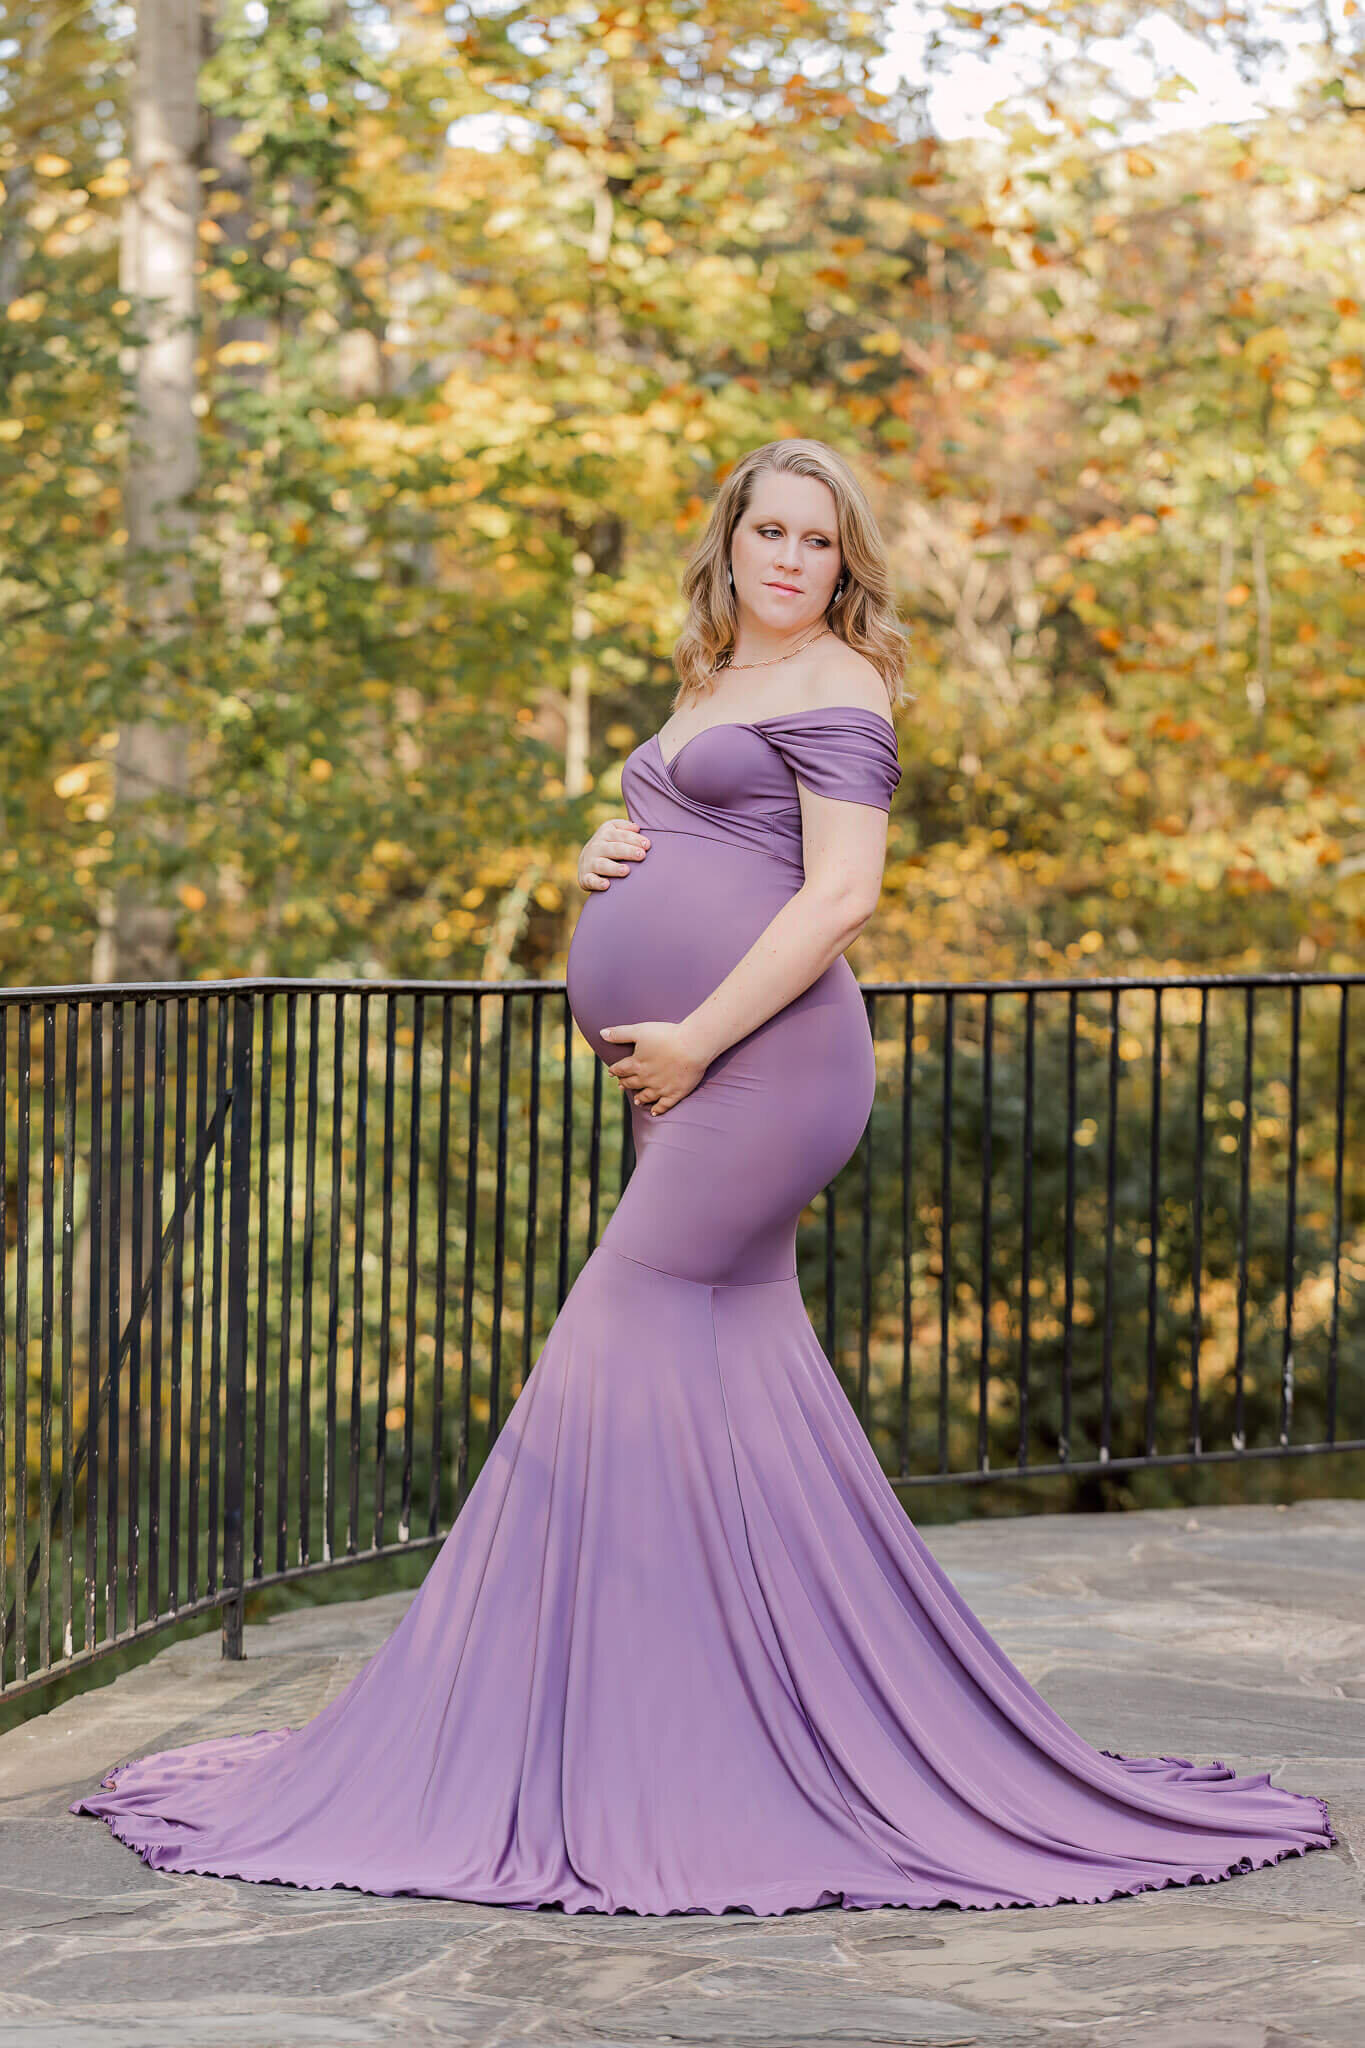 A mom-to-be wearing a purple dress for her maternity session with Centreville maternity photographer Melissa Driggers.